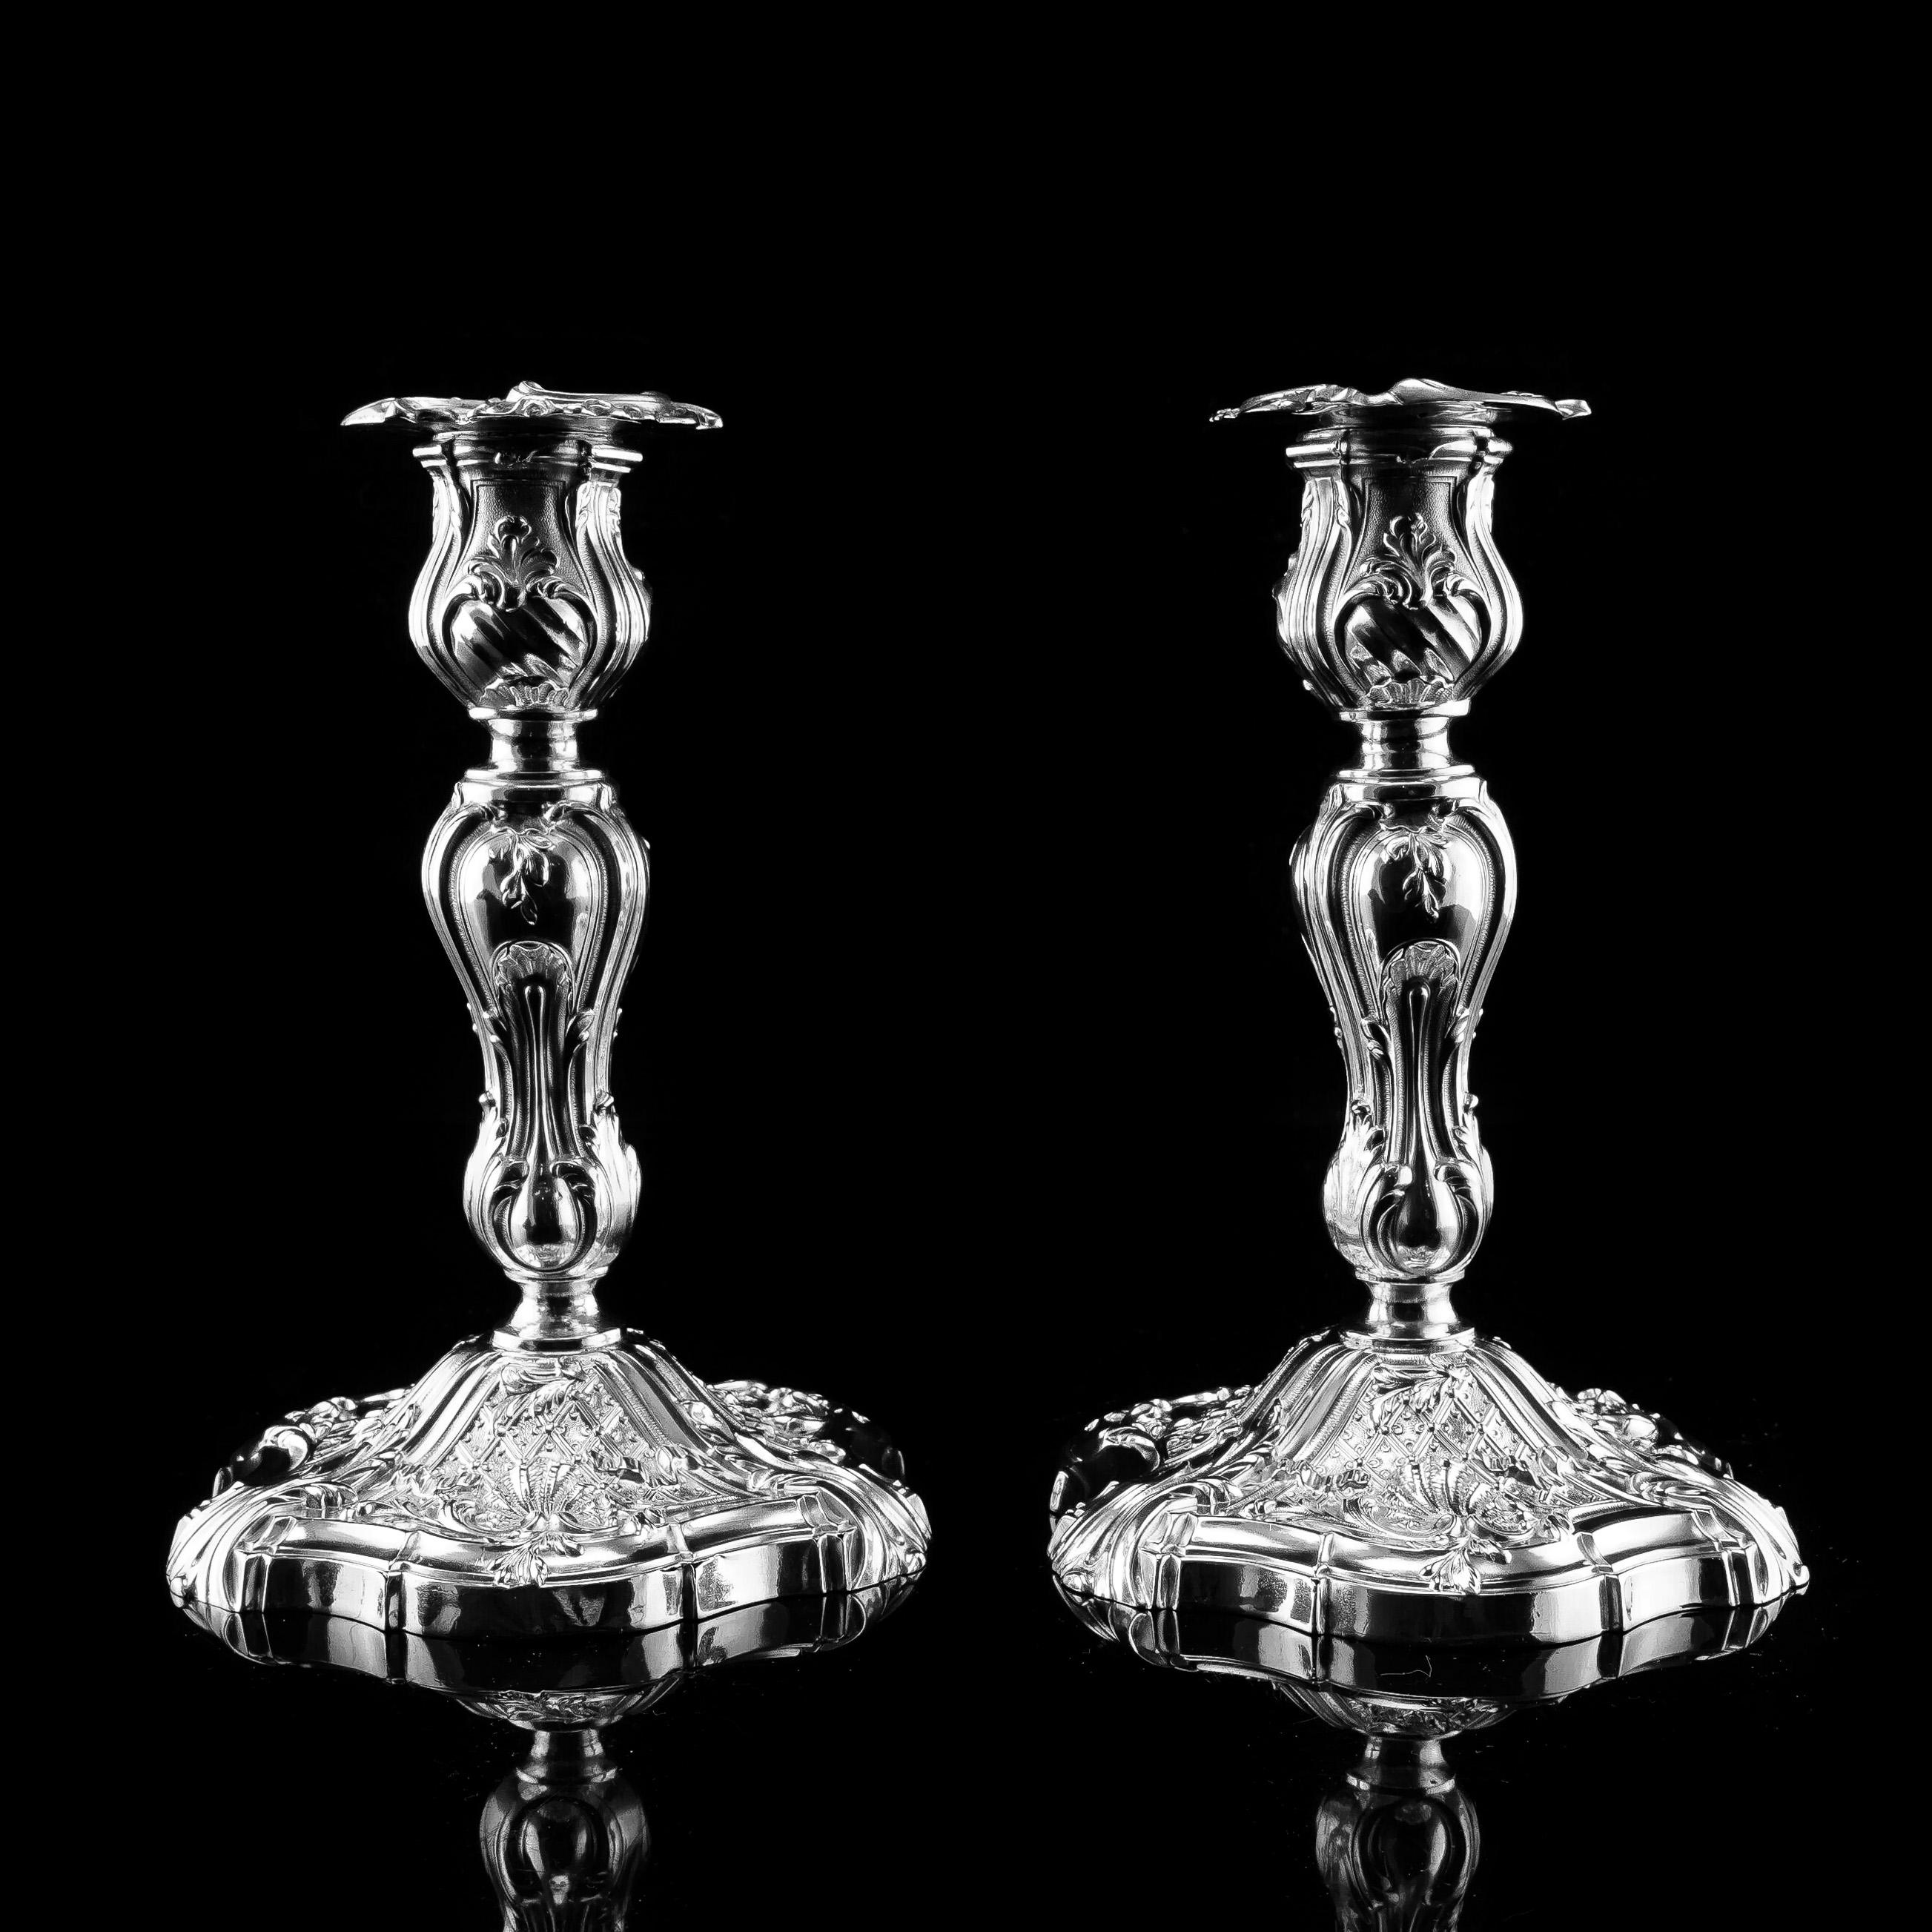 We are delighted to offer this magnificent pair of Victorian Rococo design silver candlesticks imported into London in 1890 by 